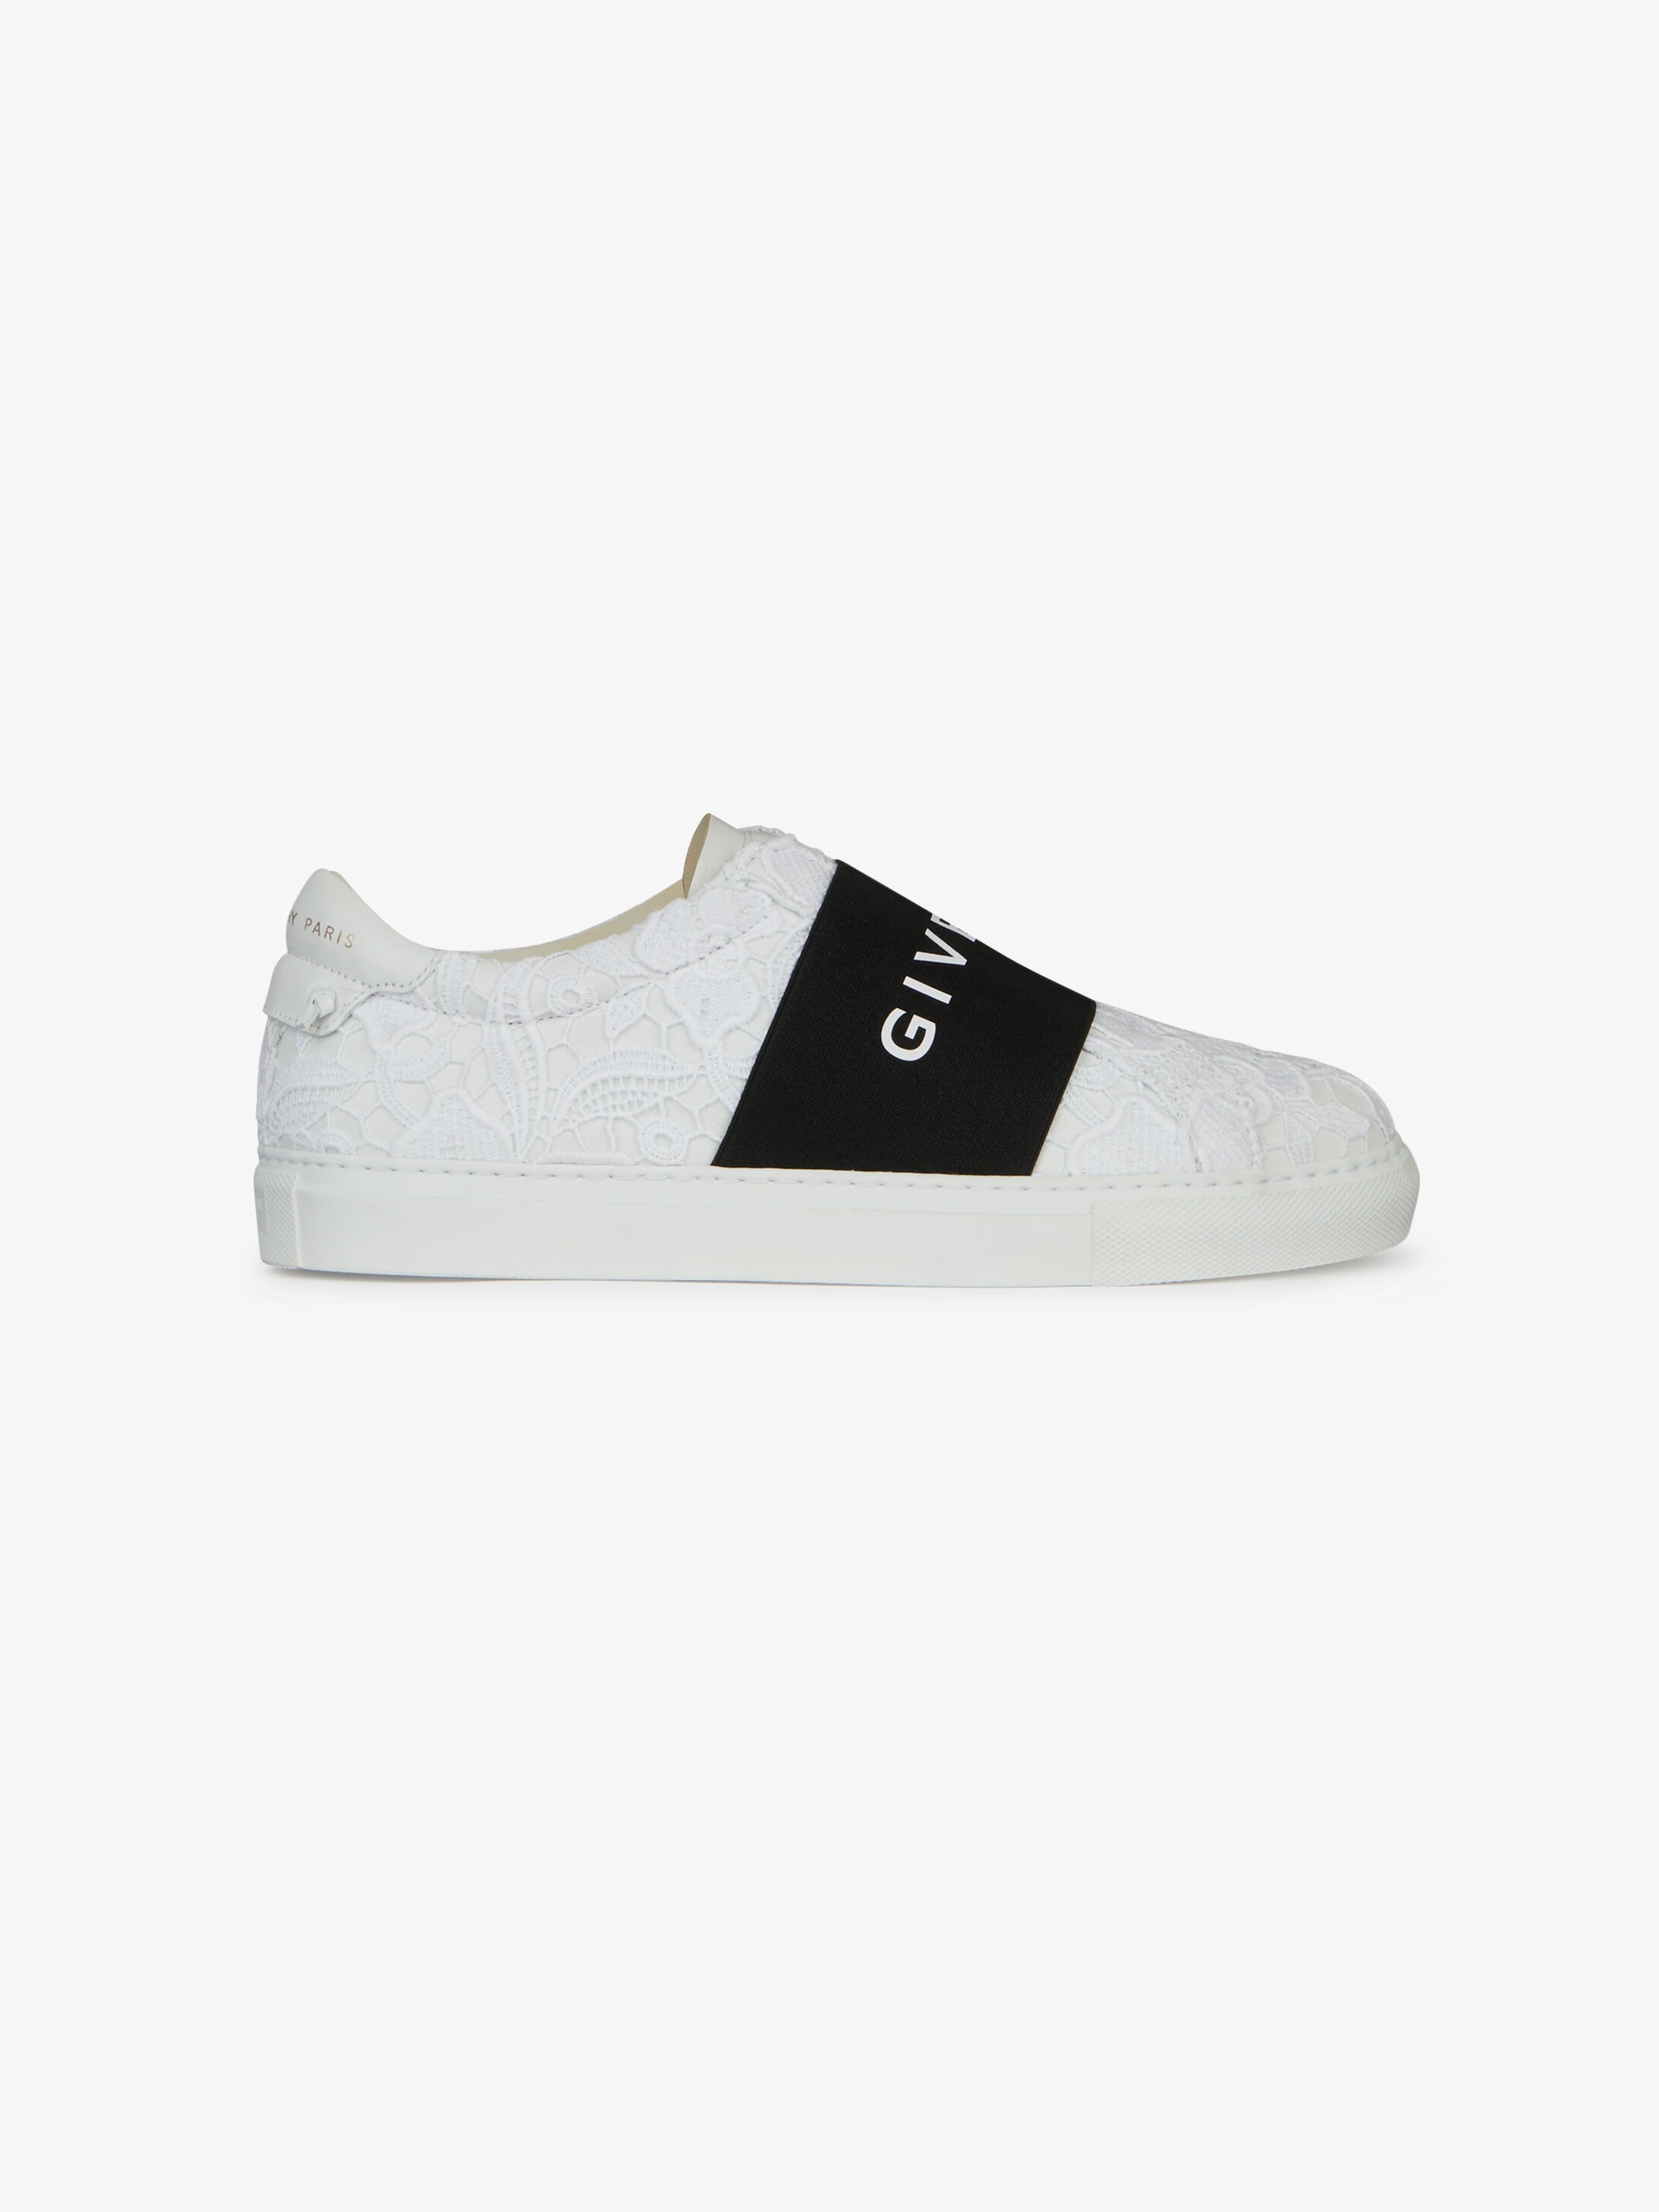 Givenchy Women S Shoes Size Chart